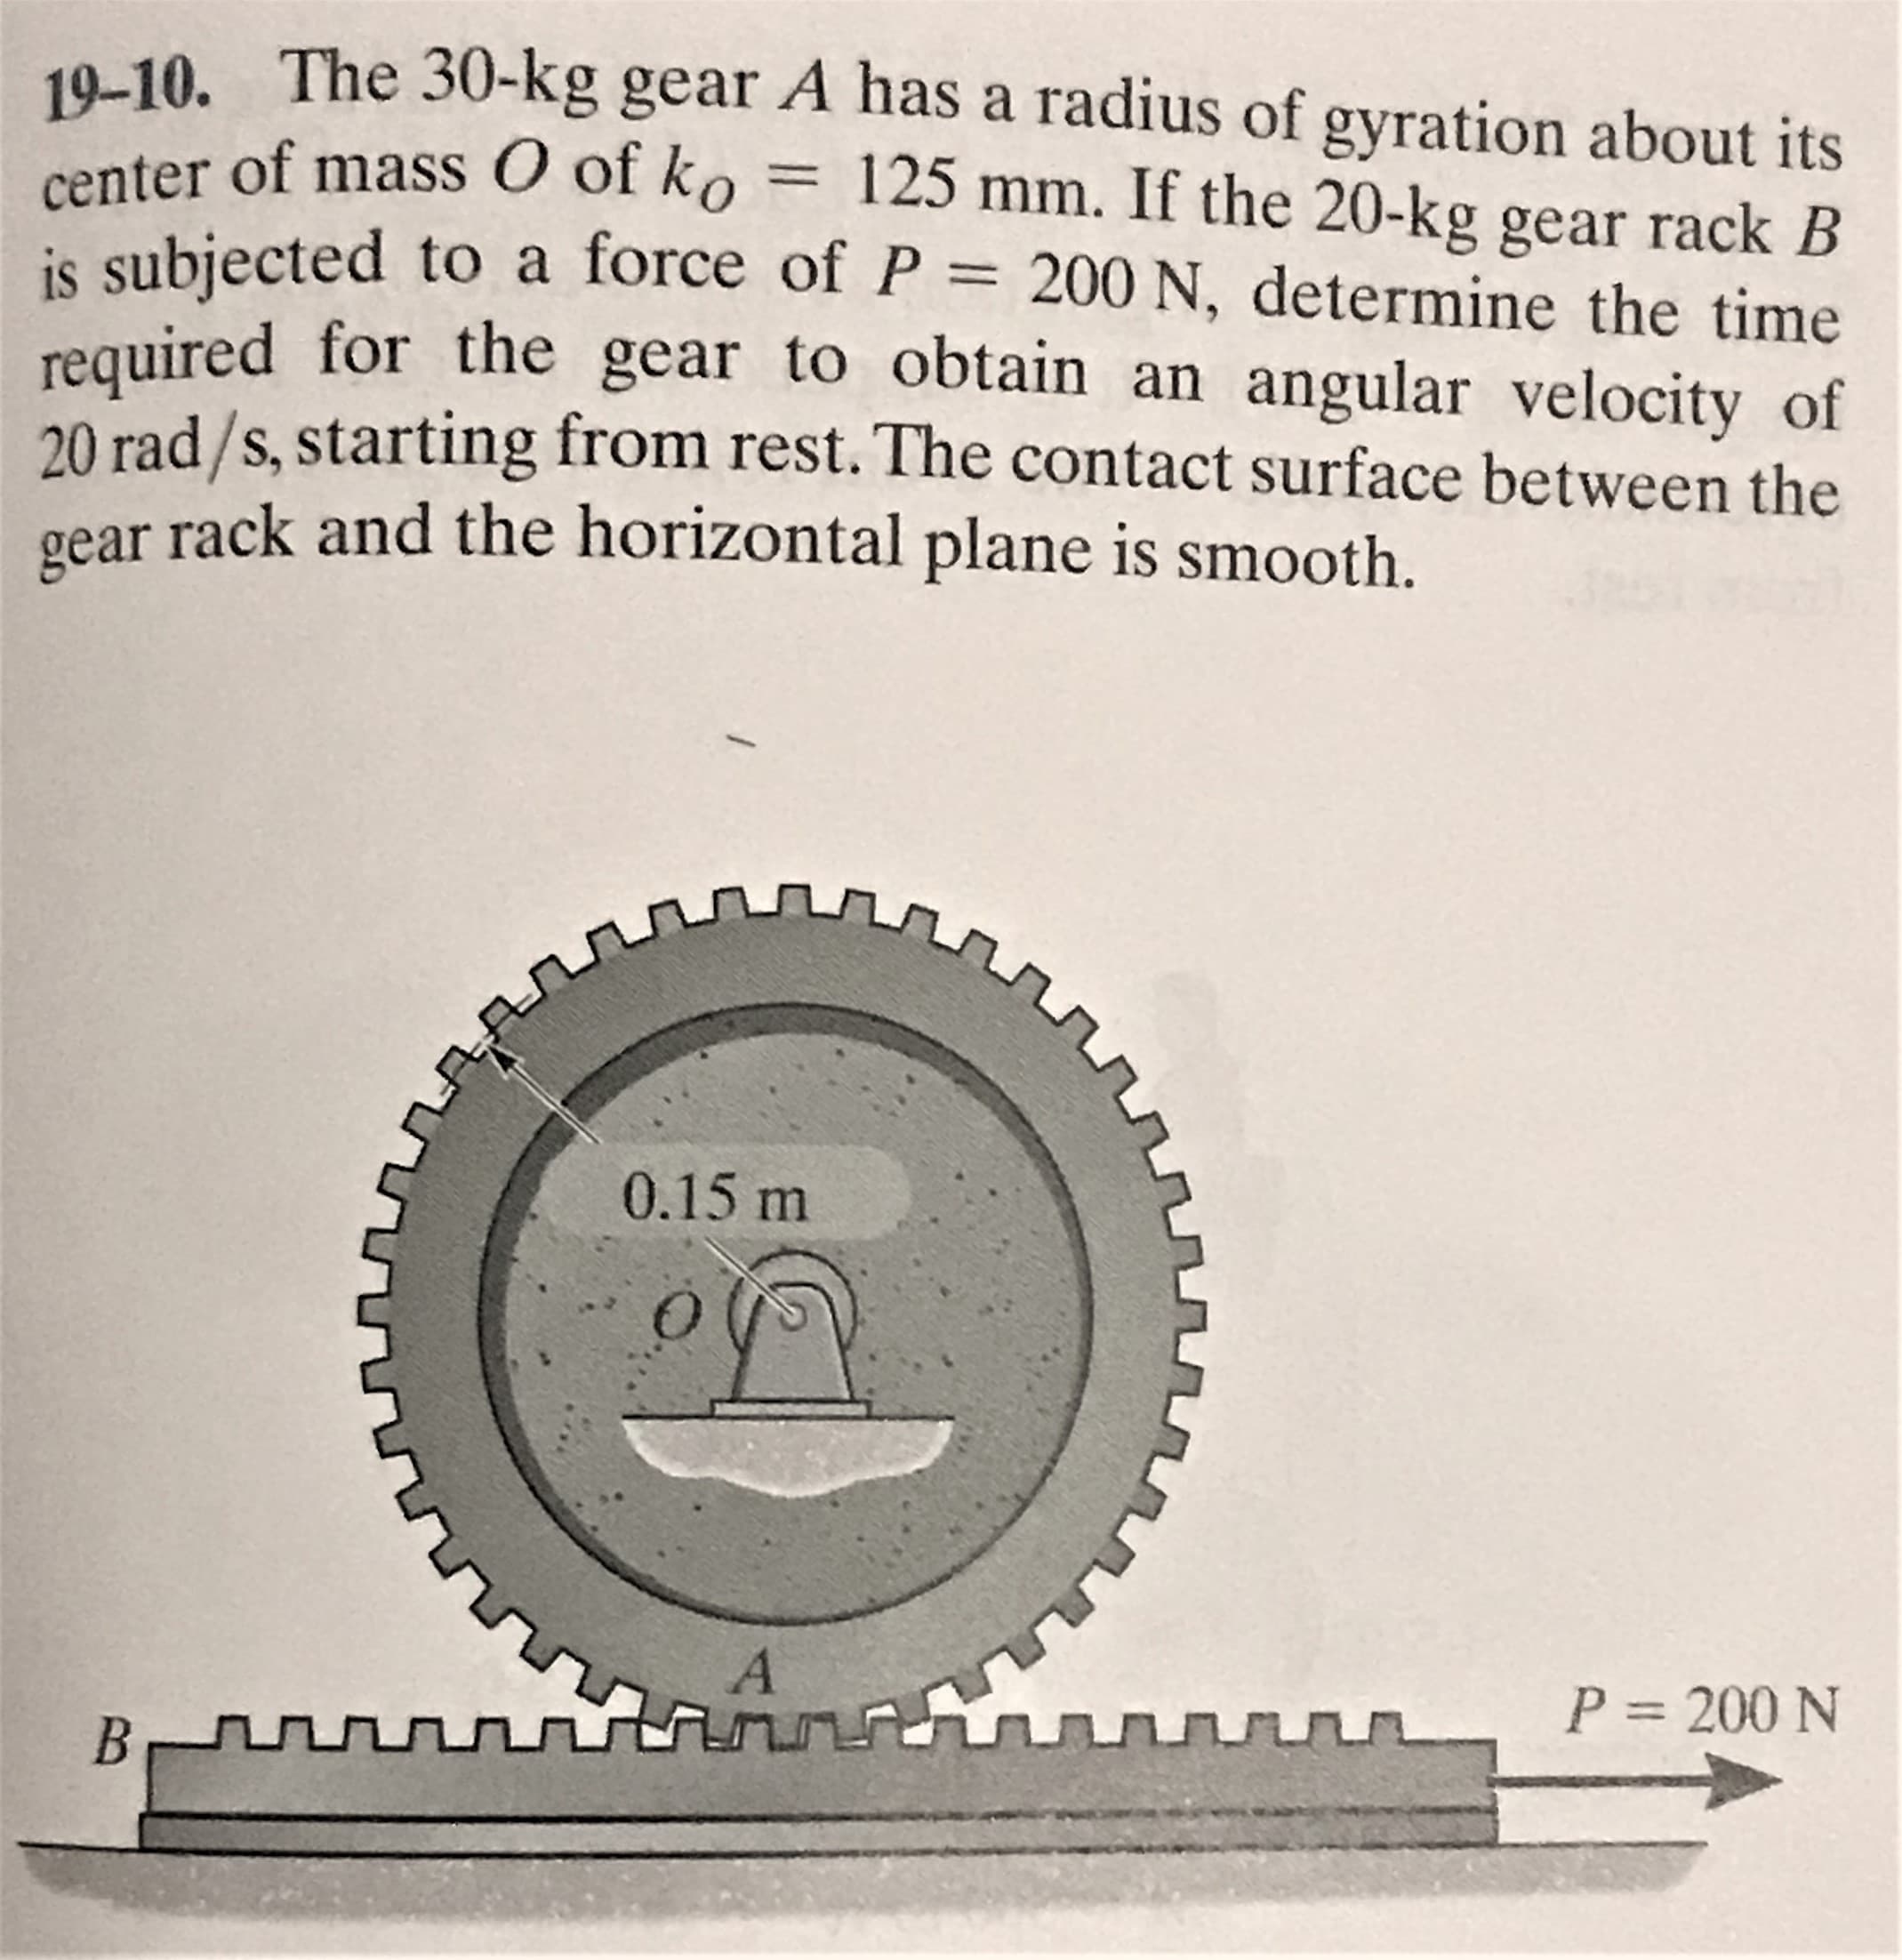 19-10. The 30-kg gear A has a radius of gyration about its
nter of mass O of ko = 125 mm. If the 20-kg gear rack B
is subjected to a force of P
required for the gear to obtain an angular velocity of
20 rad /s, starting from rest. The contact surface between the
gear rack and the horizontal plane is smooth.
P = 200 N, determine the time
0.15 m
A
P = 200 N
B
